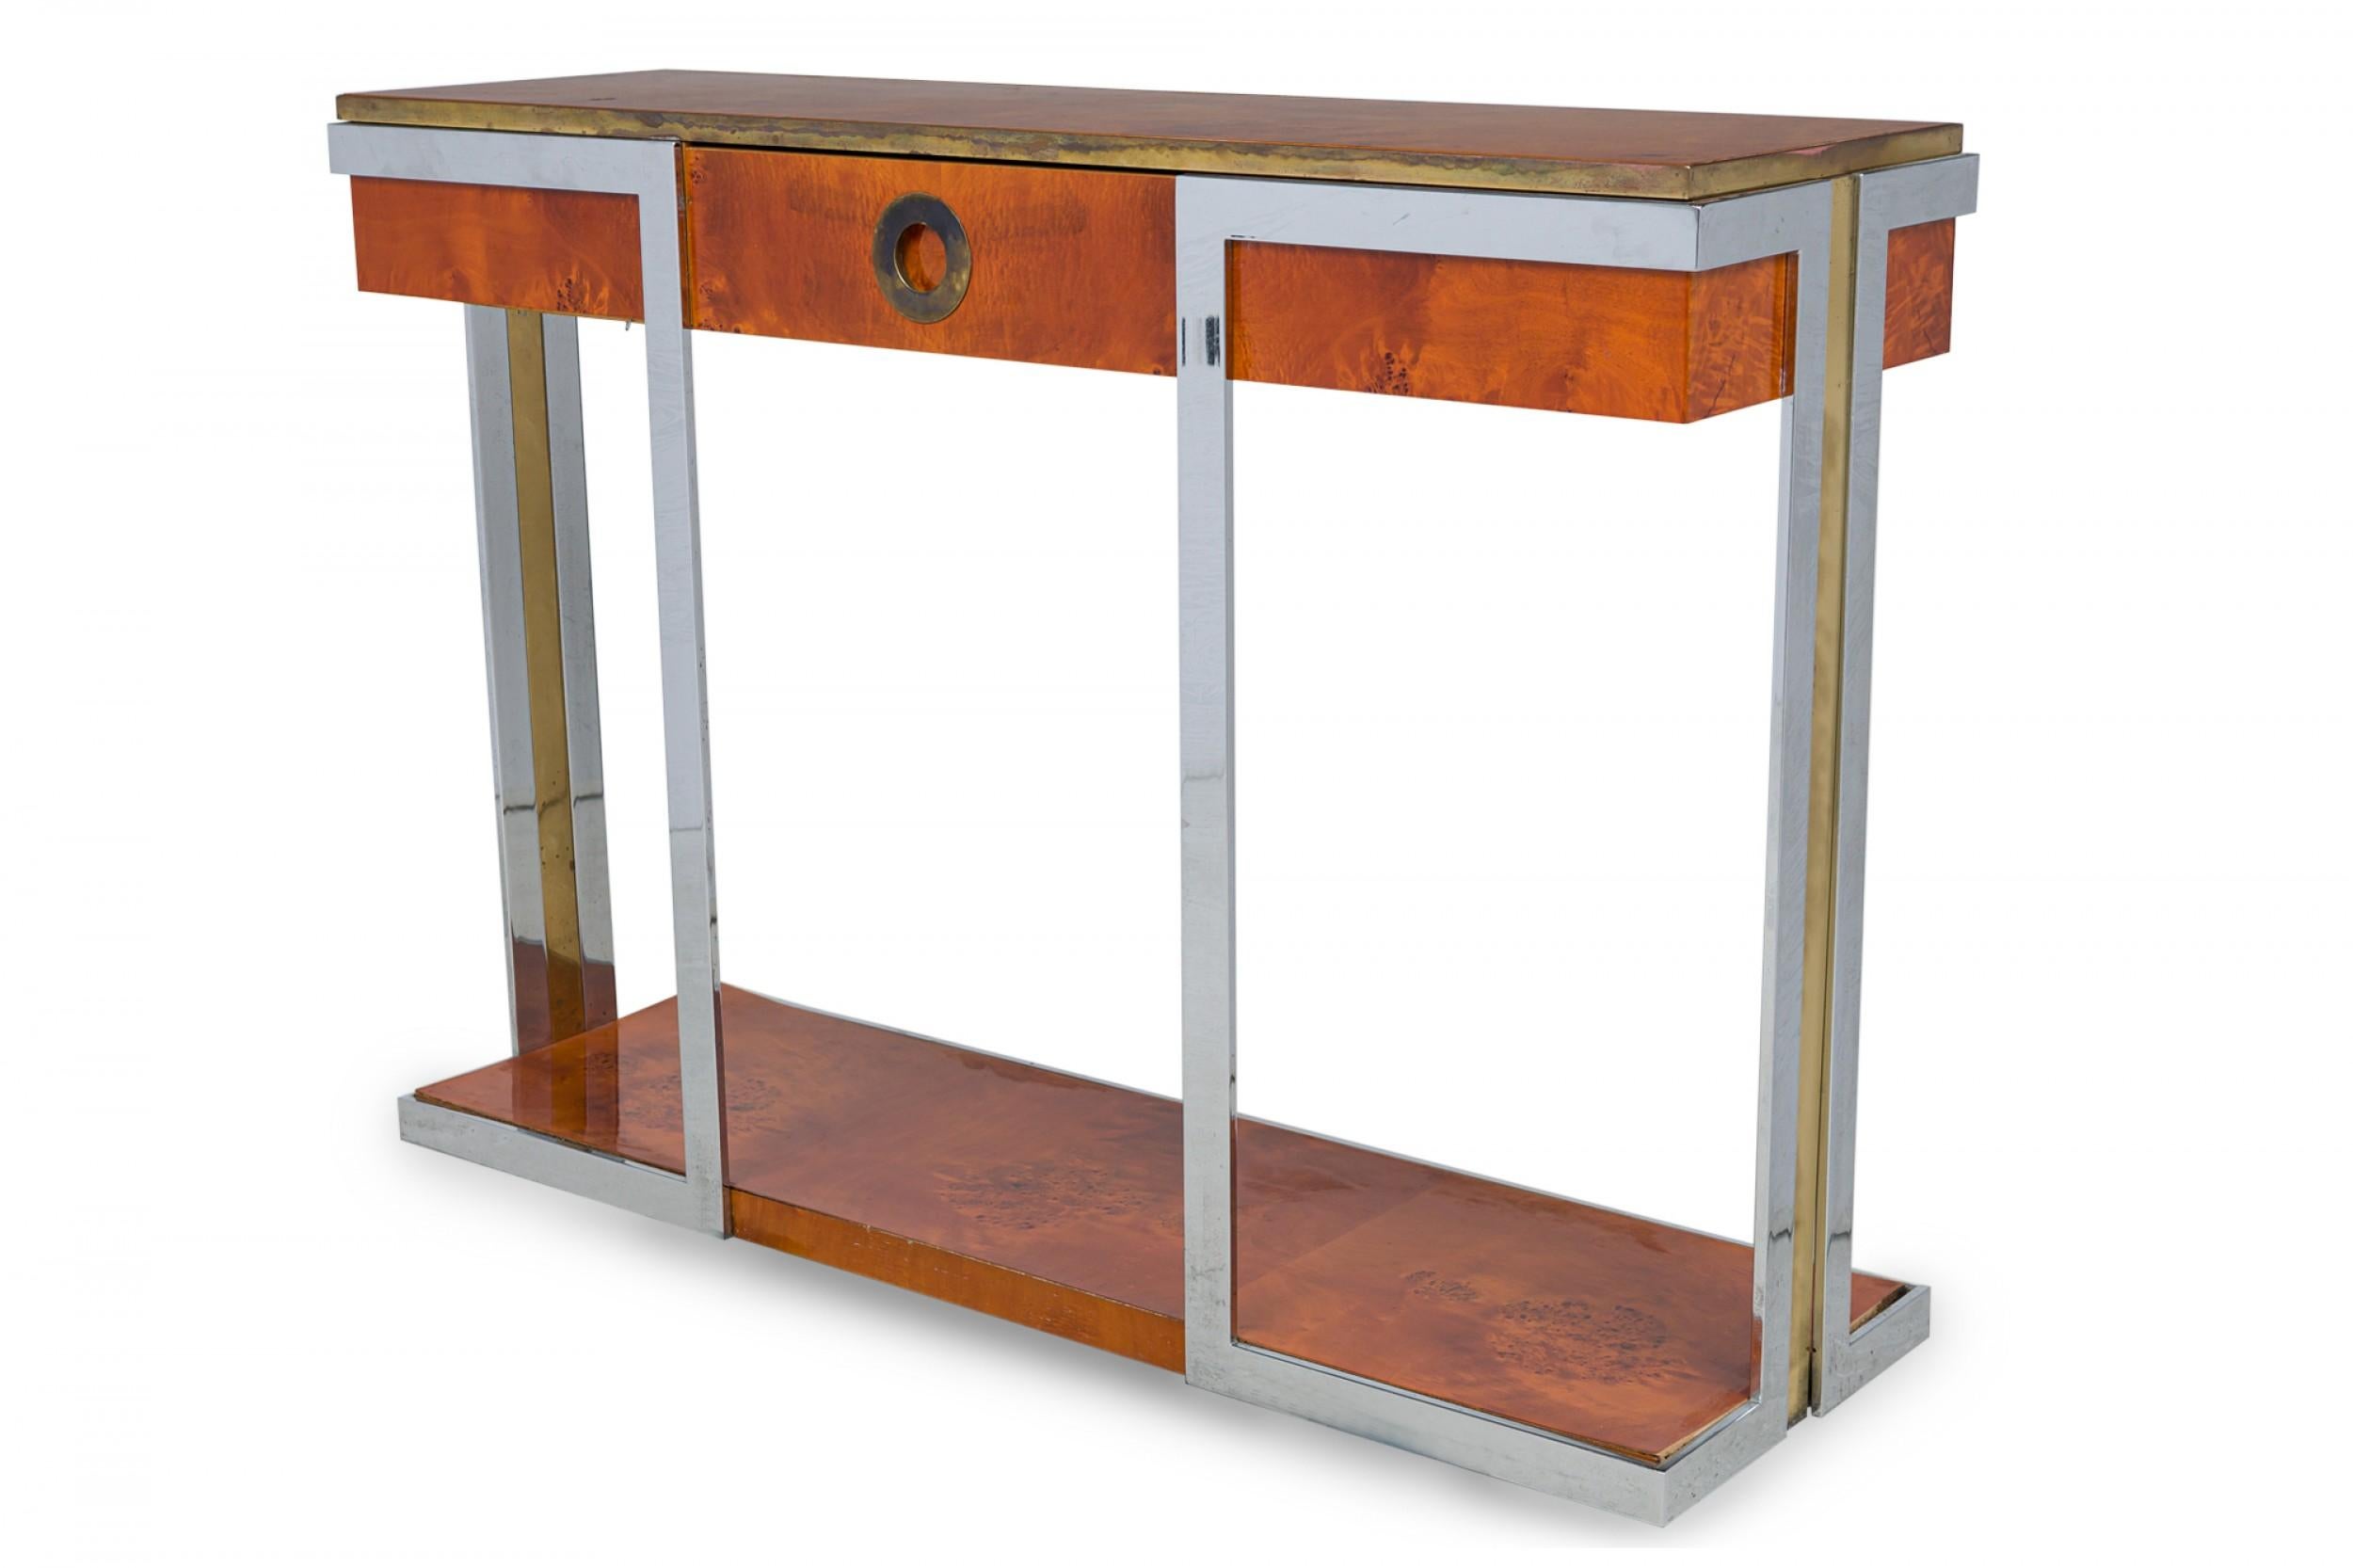 Midcentury American Modern burled walnut, chrome and brass console table in rectangular form features a veneered burl top bordered by a brass band, center drawer with recessed brass circular pull, 4-legged chromed steel frame inlaid with additional